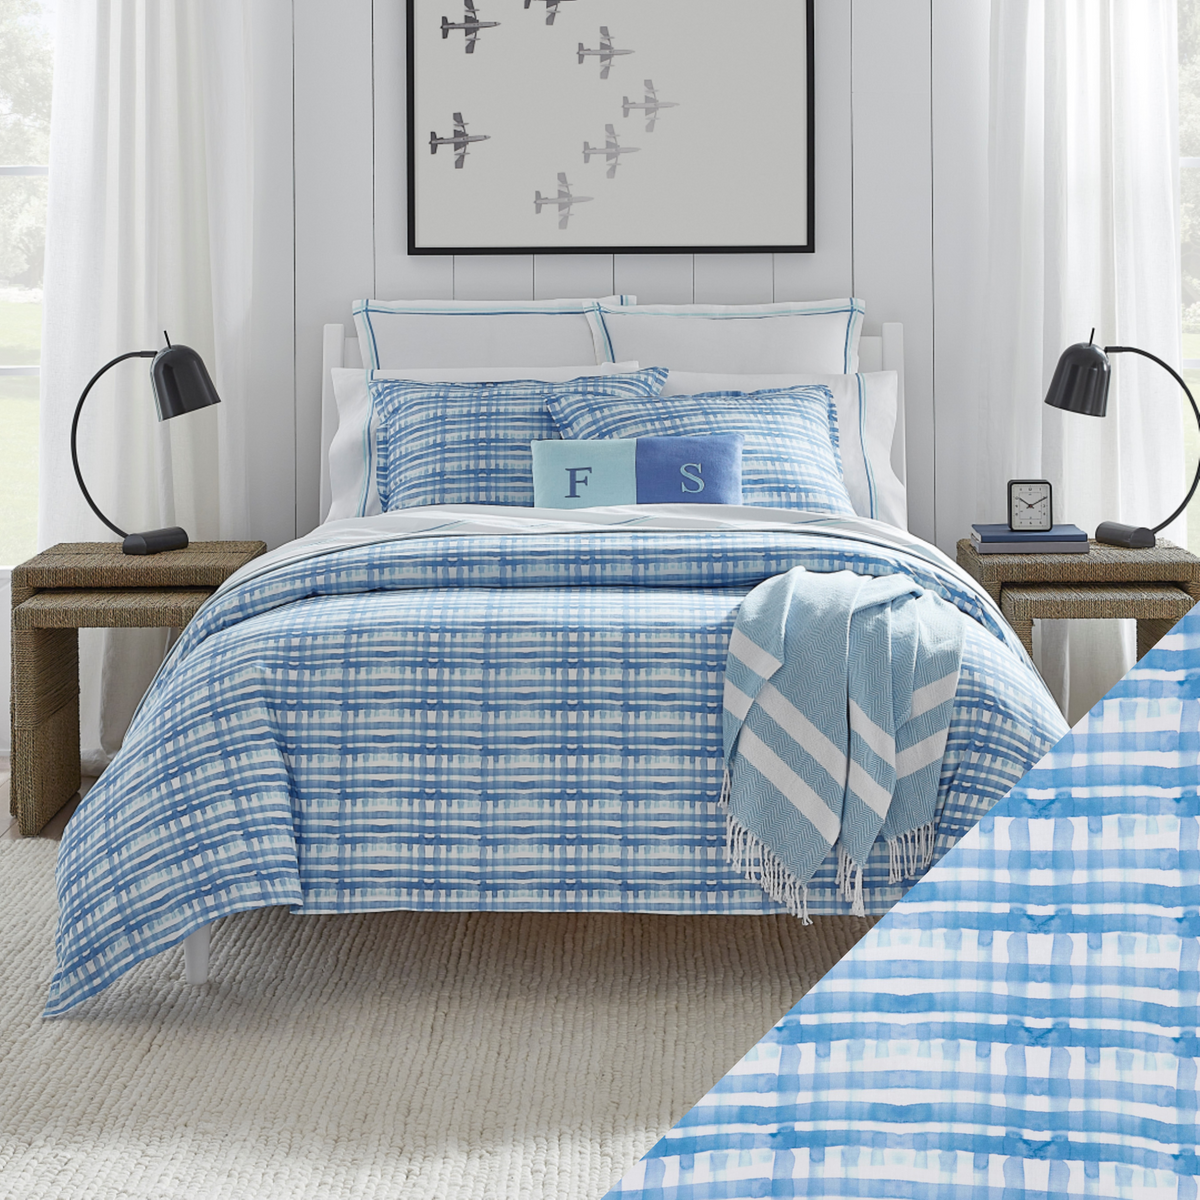 Full Lifestyle Image of Sferra Plaidino Bedding with Swatch of Clearwater